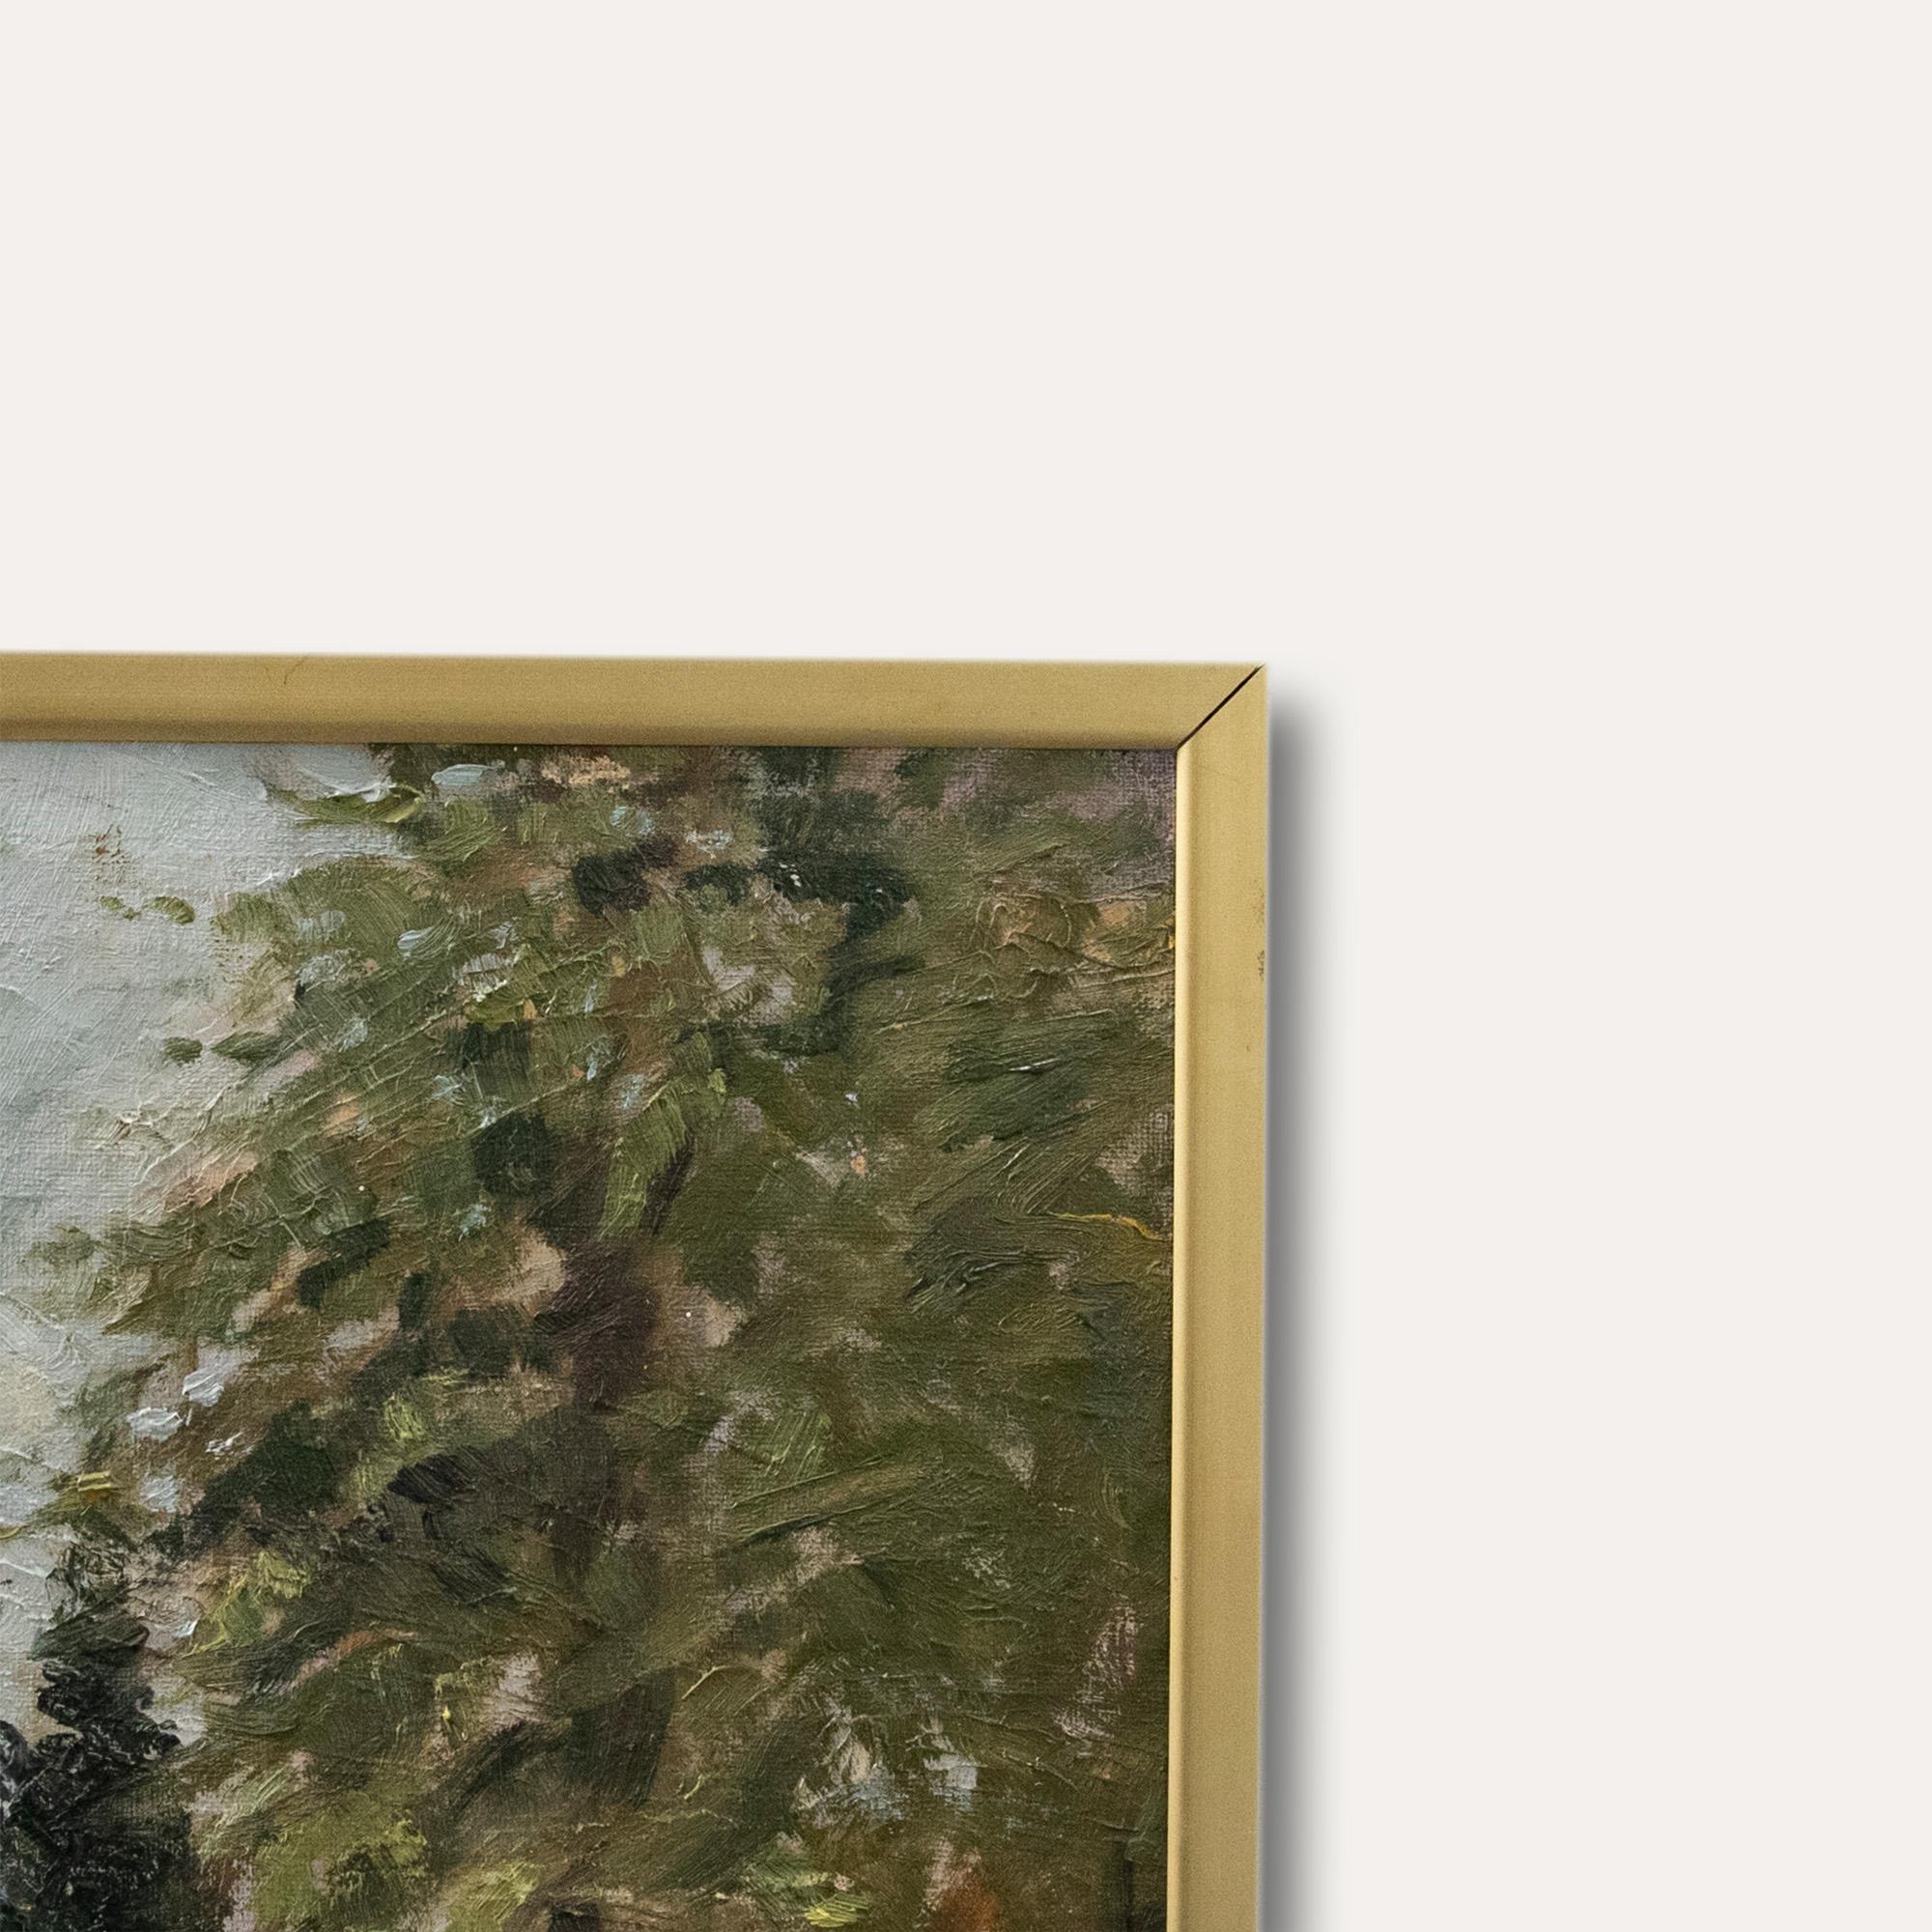 An atmospheric study of wind blowing through arboretum trees. Presented in a plain gilt-effect frame. Unsigned. On canvas laid to board.